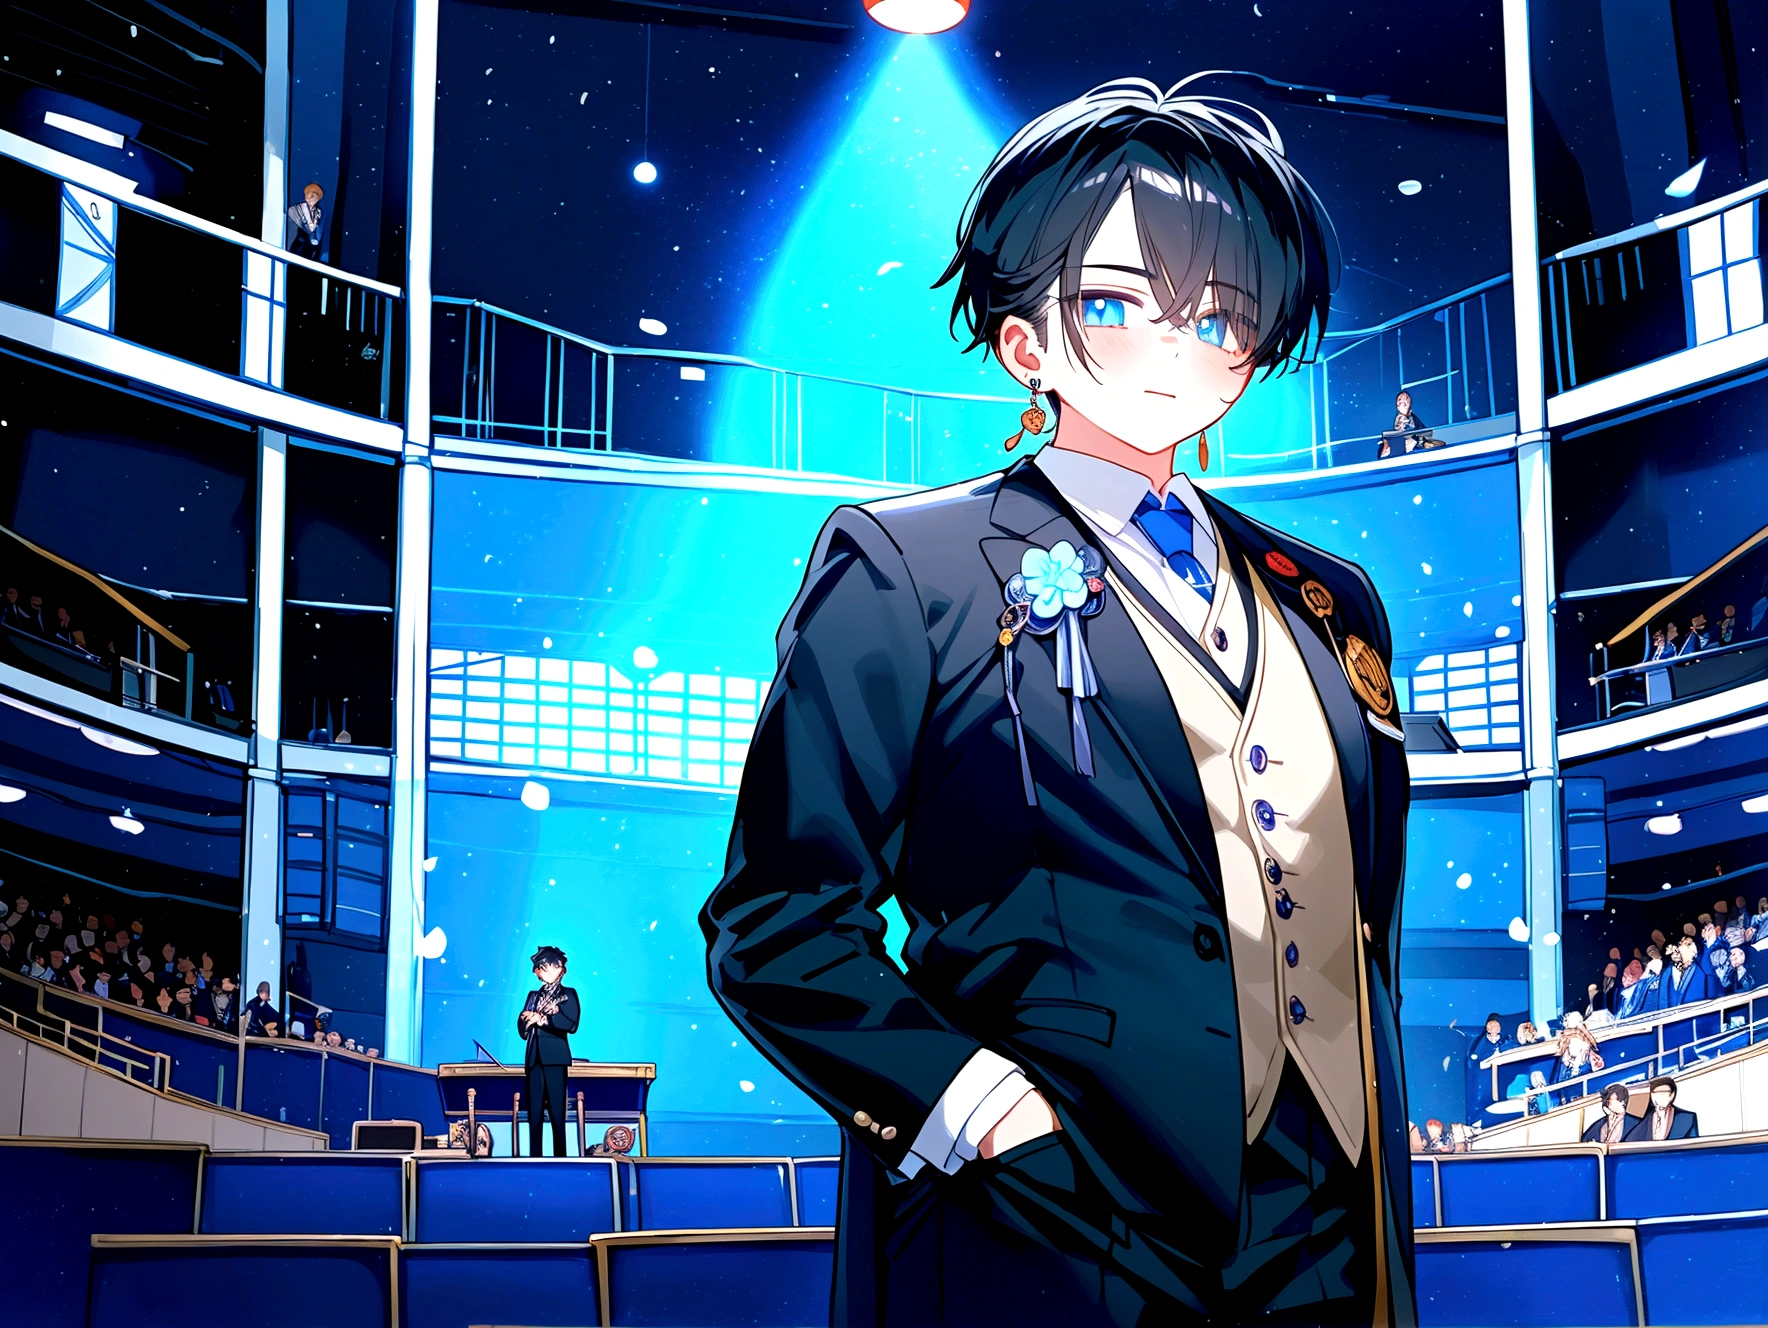 1boy, Anime figure in suit and tie standing in front of a stage, pretty anime pose, Big anime guy with blue eyes, Anime moe art style, in a strict suit, He's wearing a suit, Young Anime Man, inspired by Okumura Masanobu, inspired by Okumura Togyu, Anime handsome man, handsome guy in demon slayer art, Treble clef as earring, concert hall background